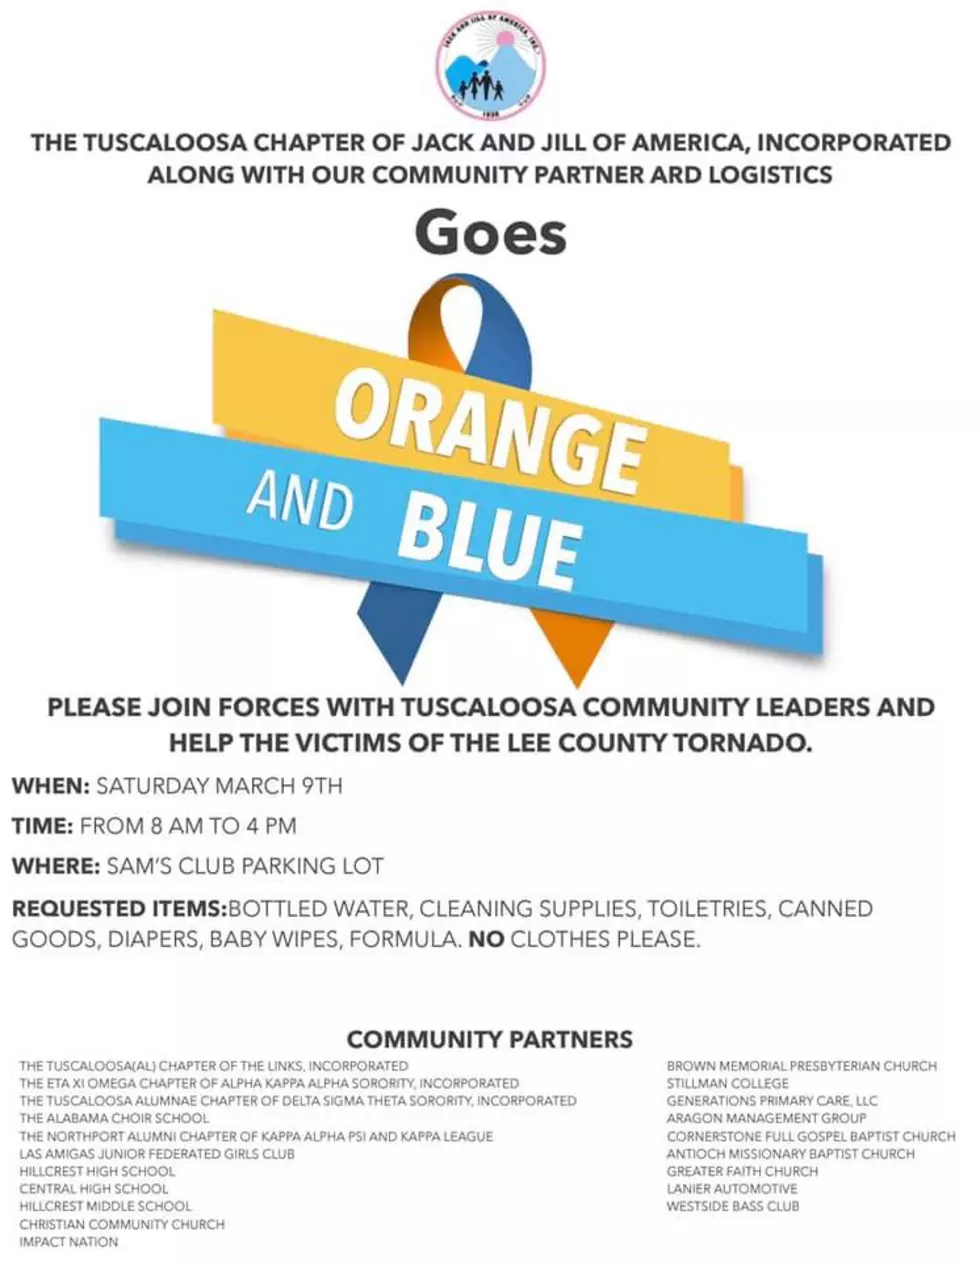 Jack and Jill Goes Orange and Blue for Tornado Recovery